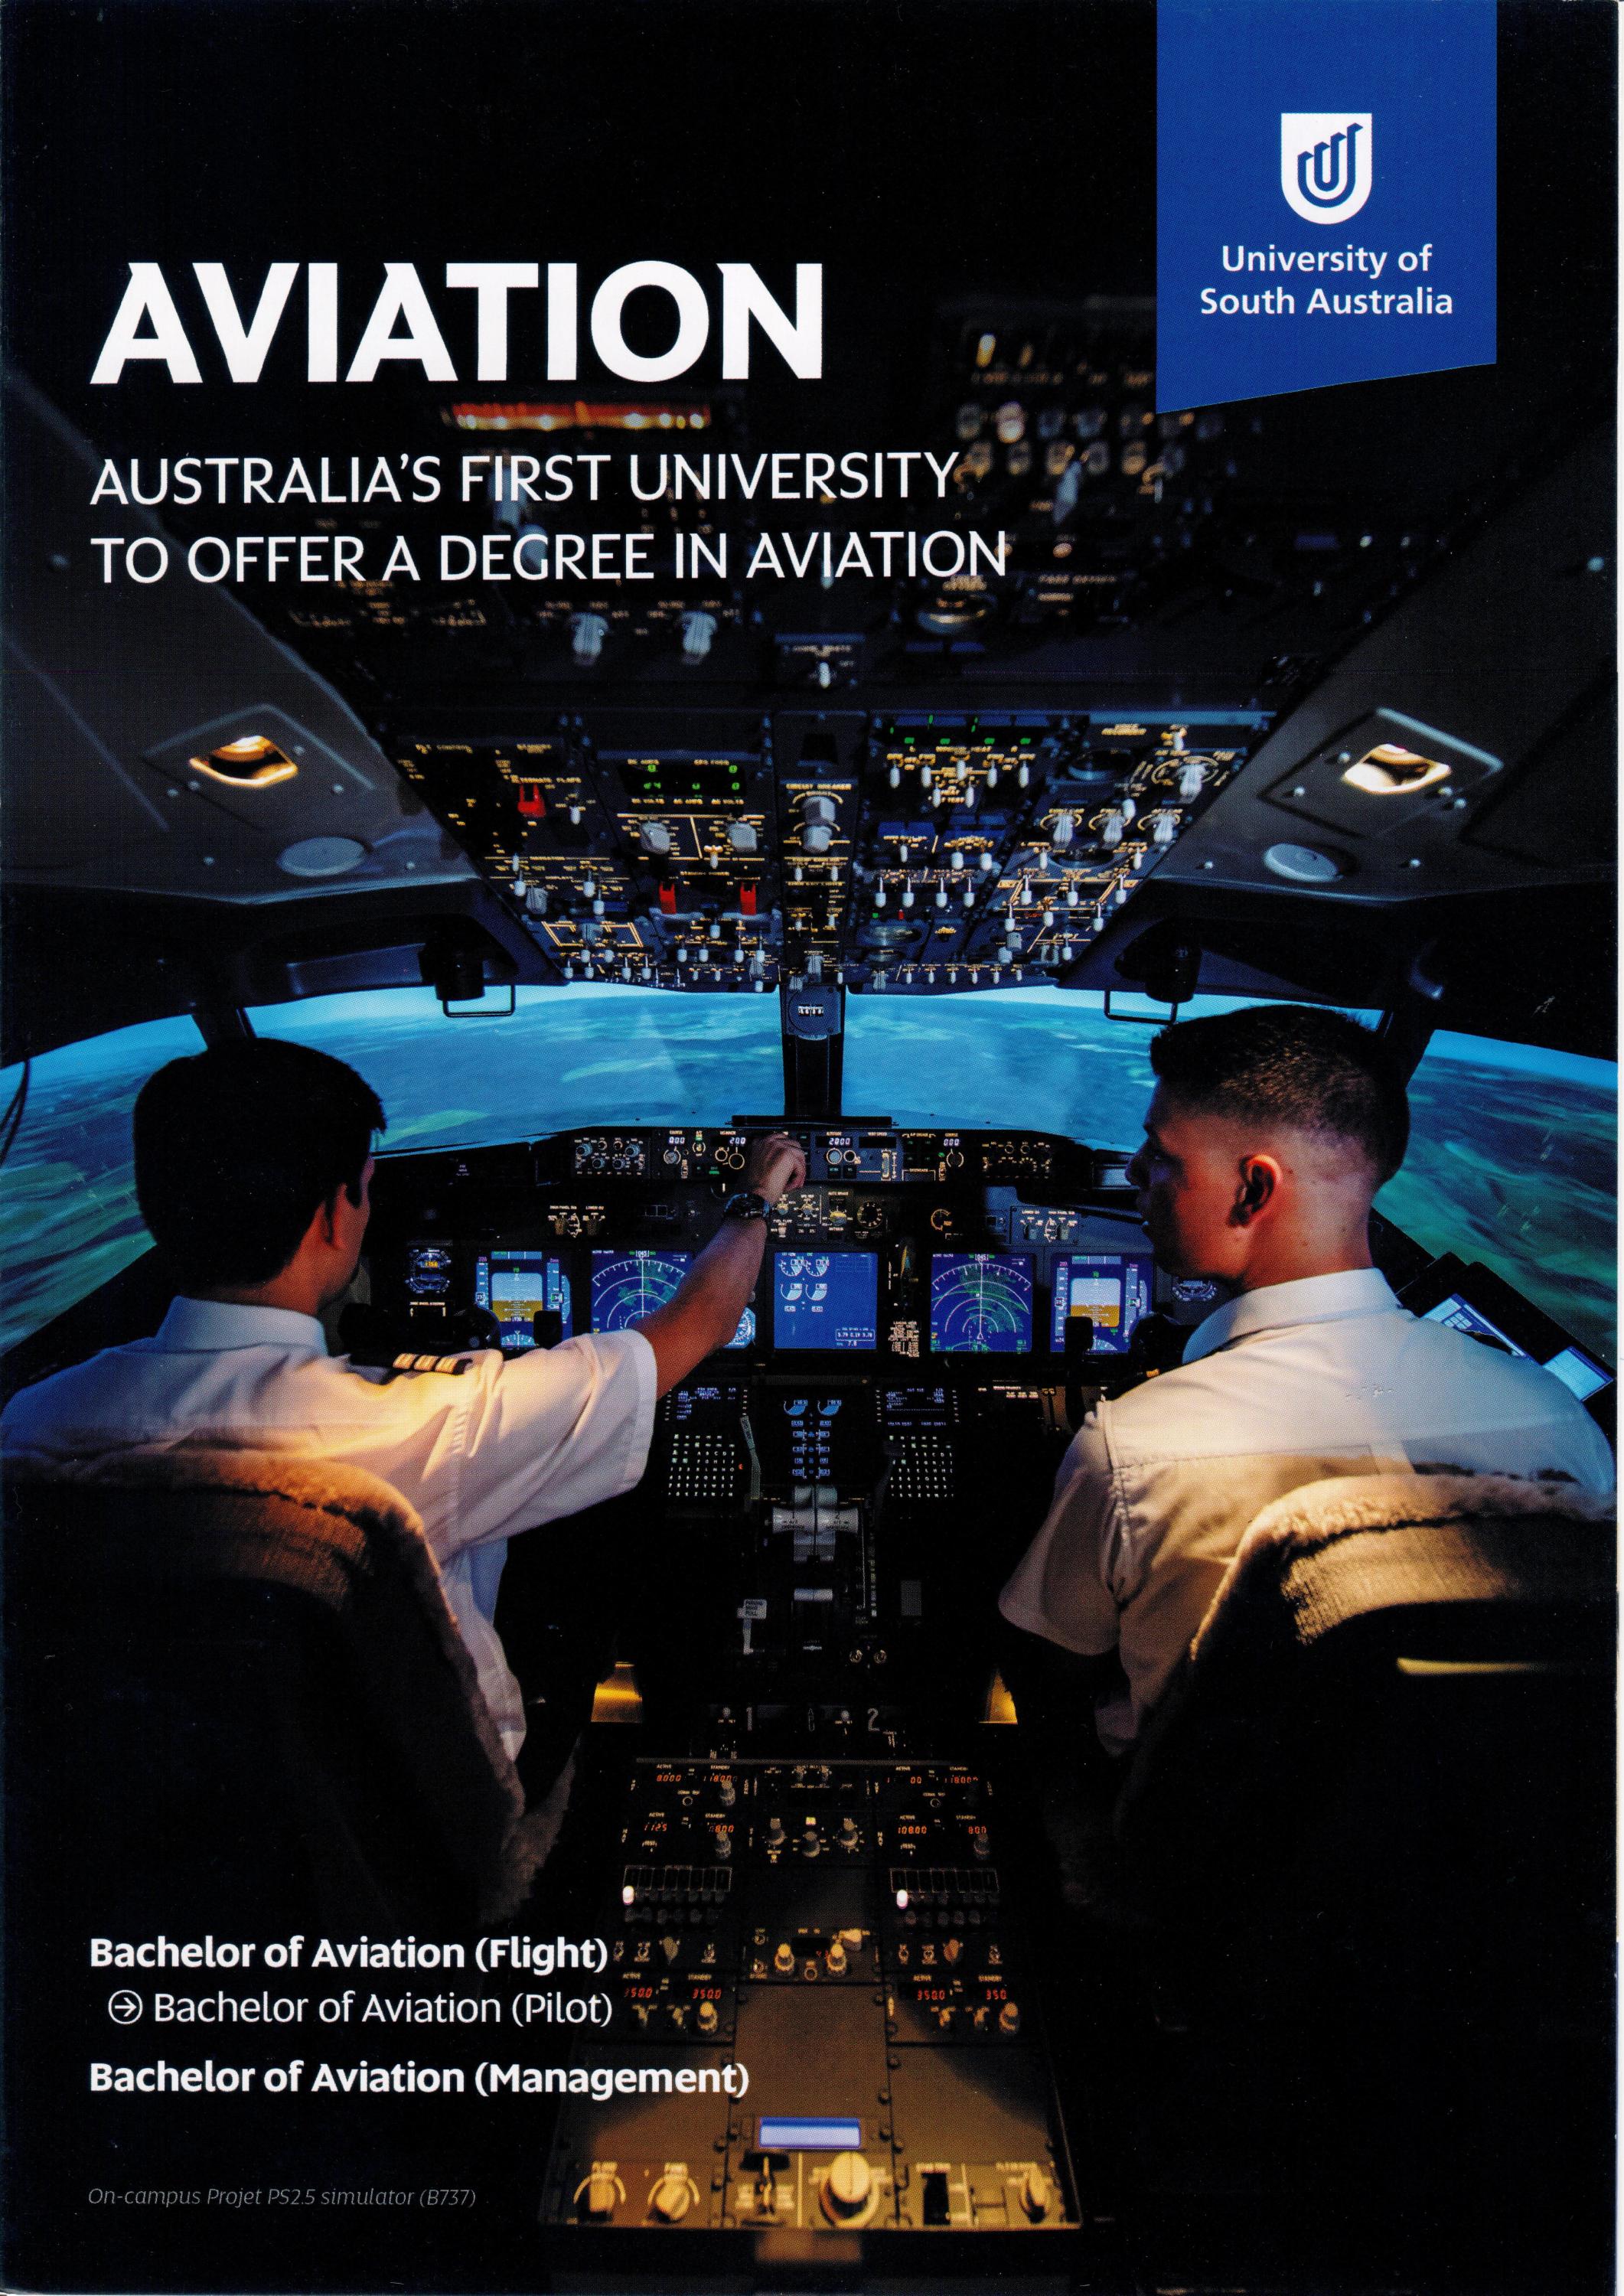 Australia's First University To Offer A Degree in AVIATION